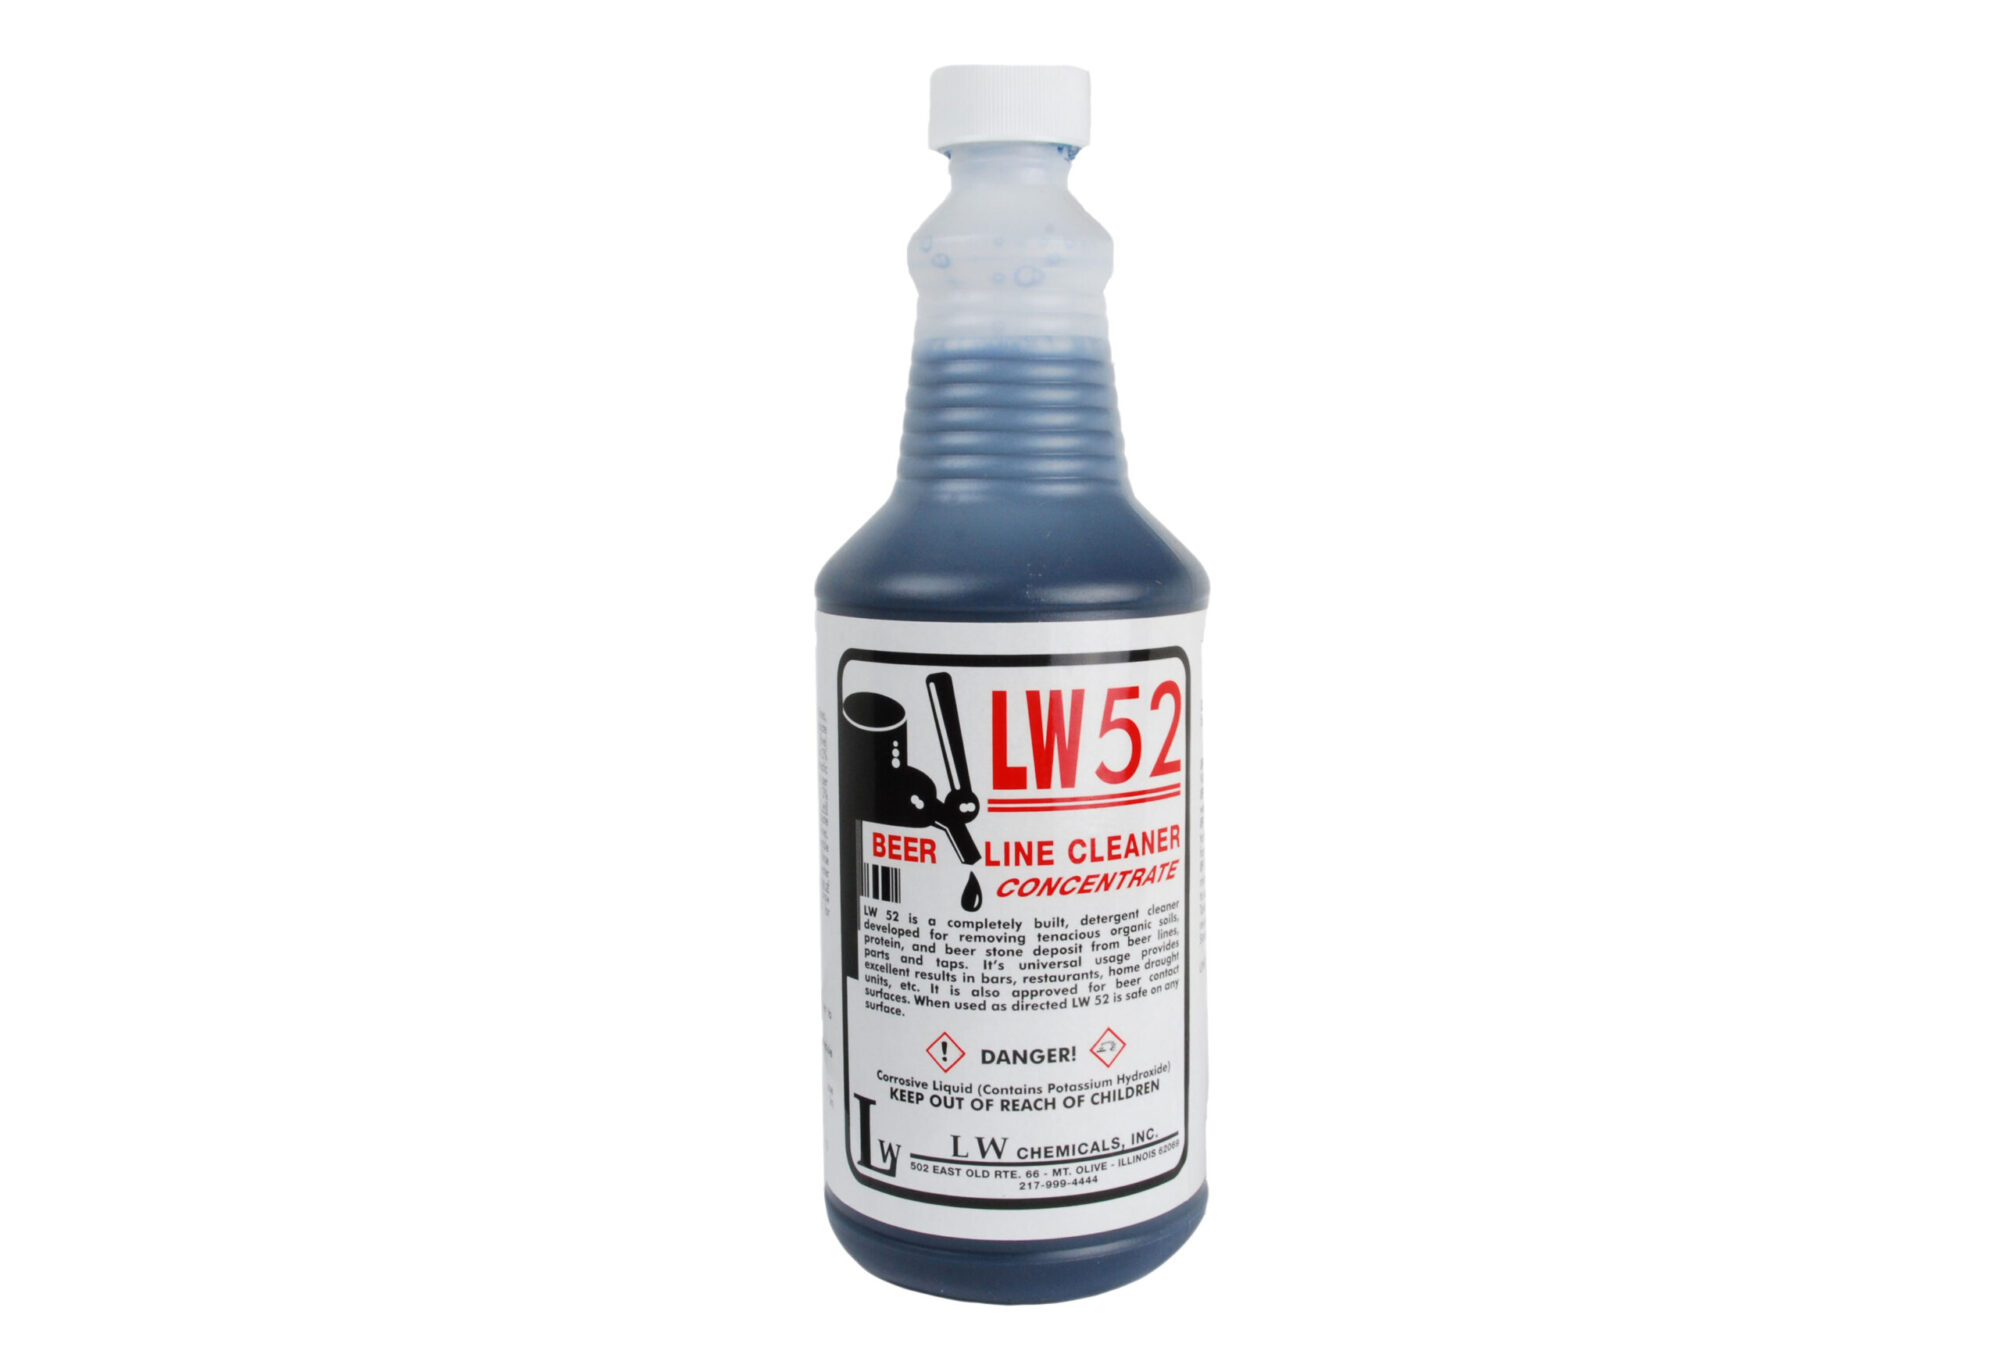 AB052 Concentrated Beer Line Cleaner - LW Chemical - 5oz/Gal = 2%